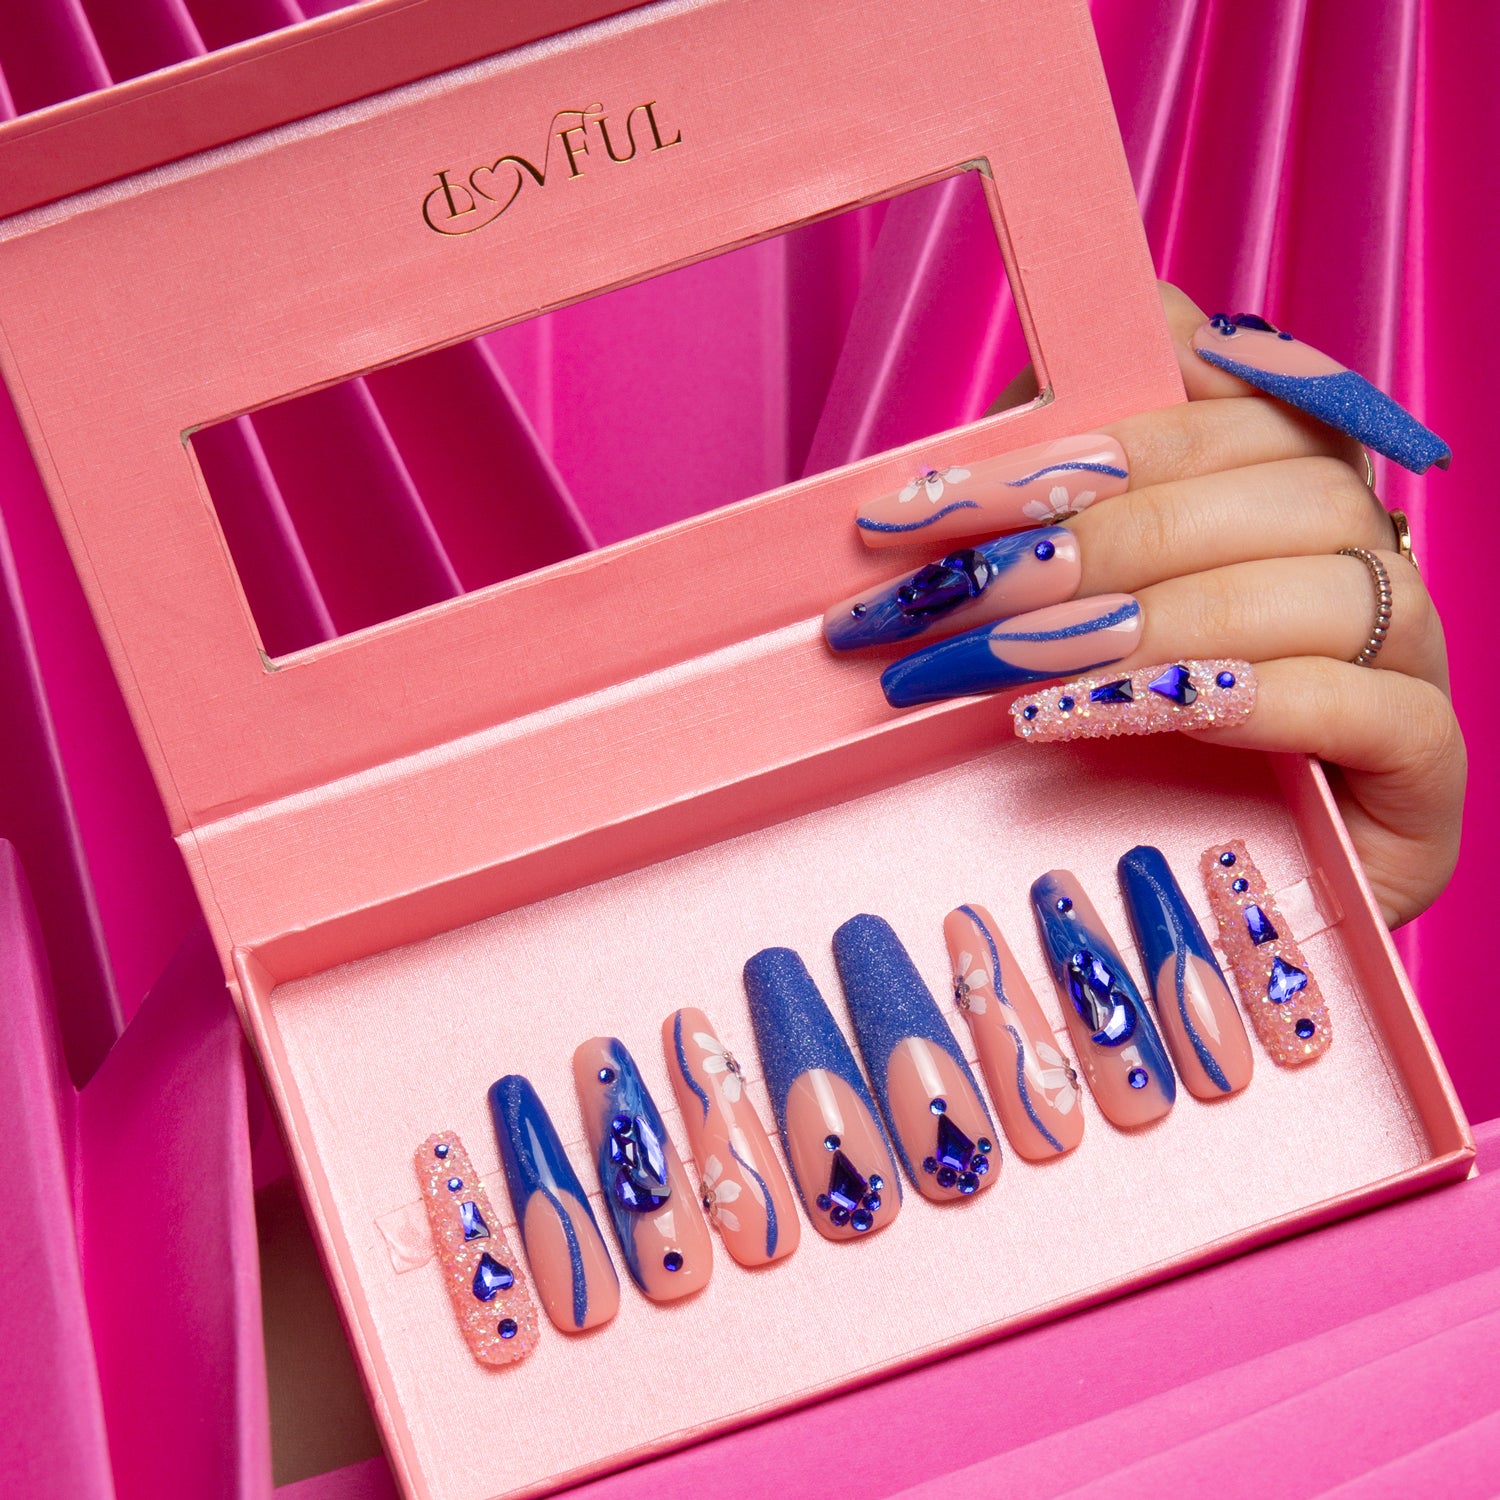 Hand showcasing blue suede press-on nails by Lovful.com, holding a pink box with a set of blue press-on nails featuring blue French tips, curvy lines, crystal decorations, and blue heart-shaped gems. Pink draped fabric in the background.